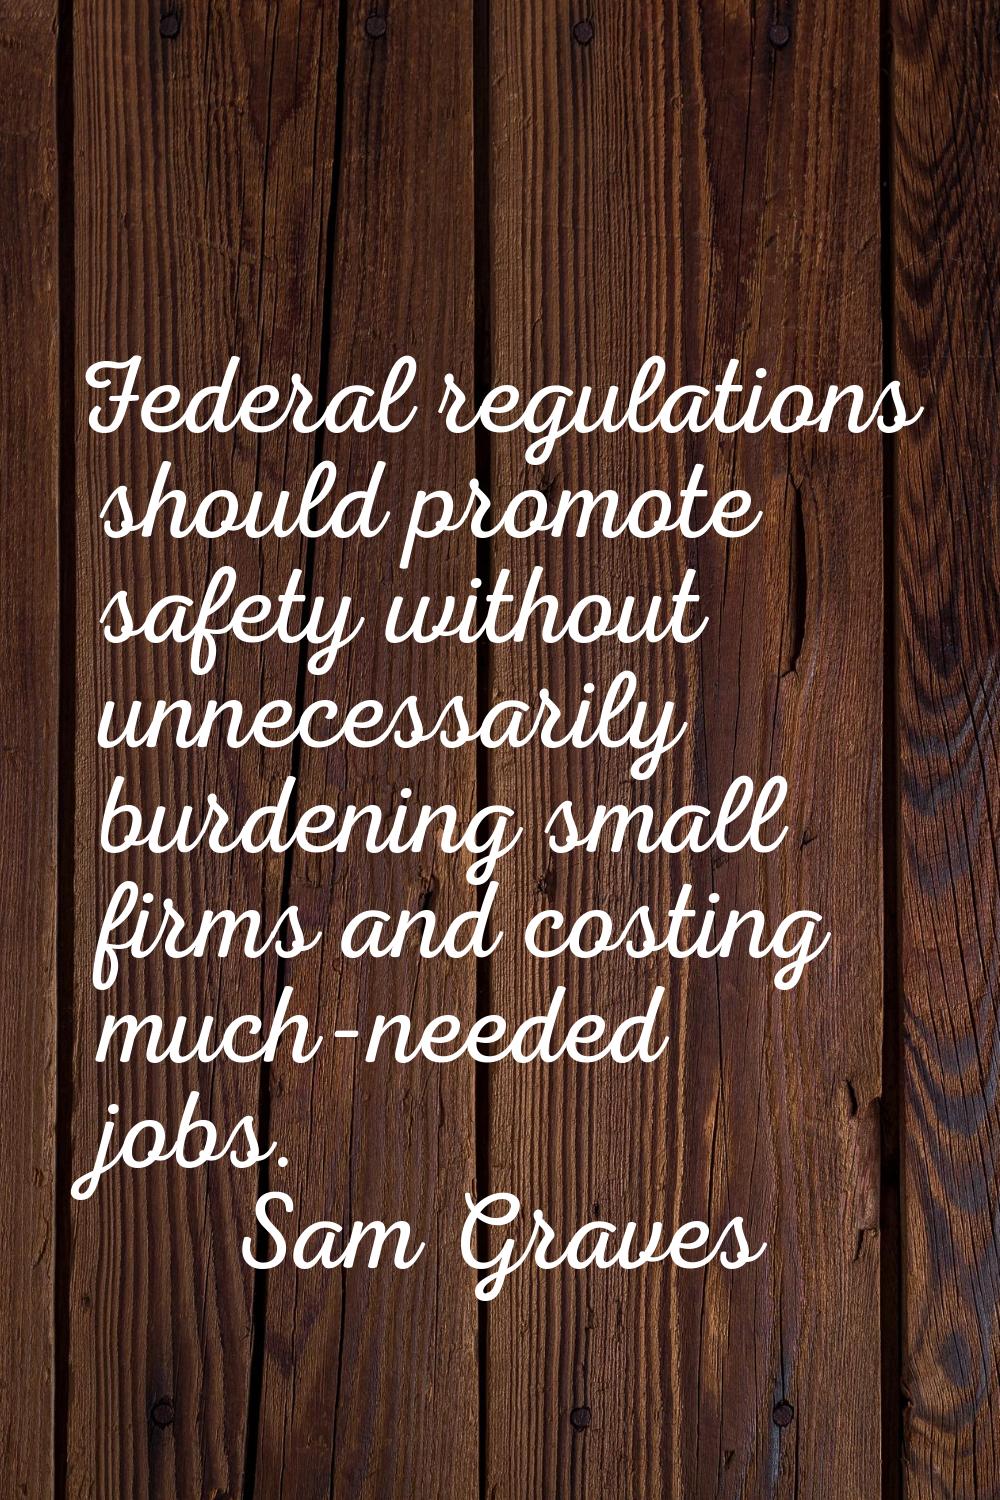 Federal regulations should promote safety without unnecessarily burdening small firms and costing m